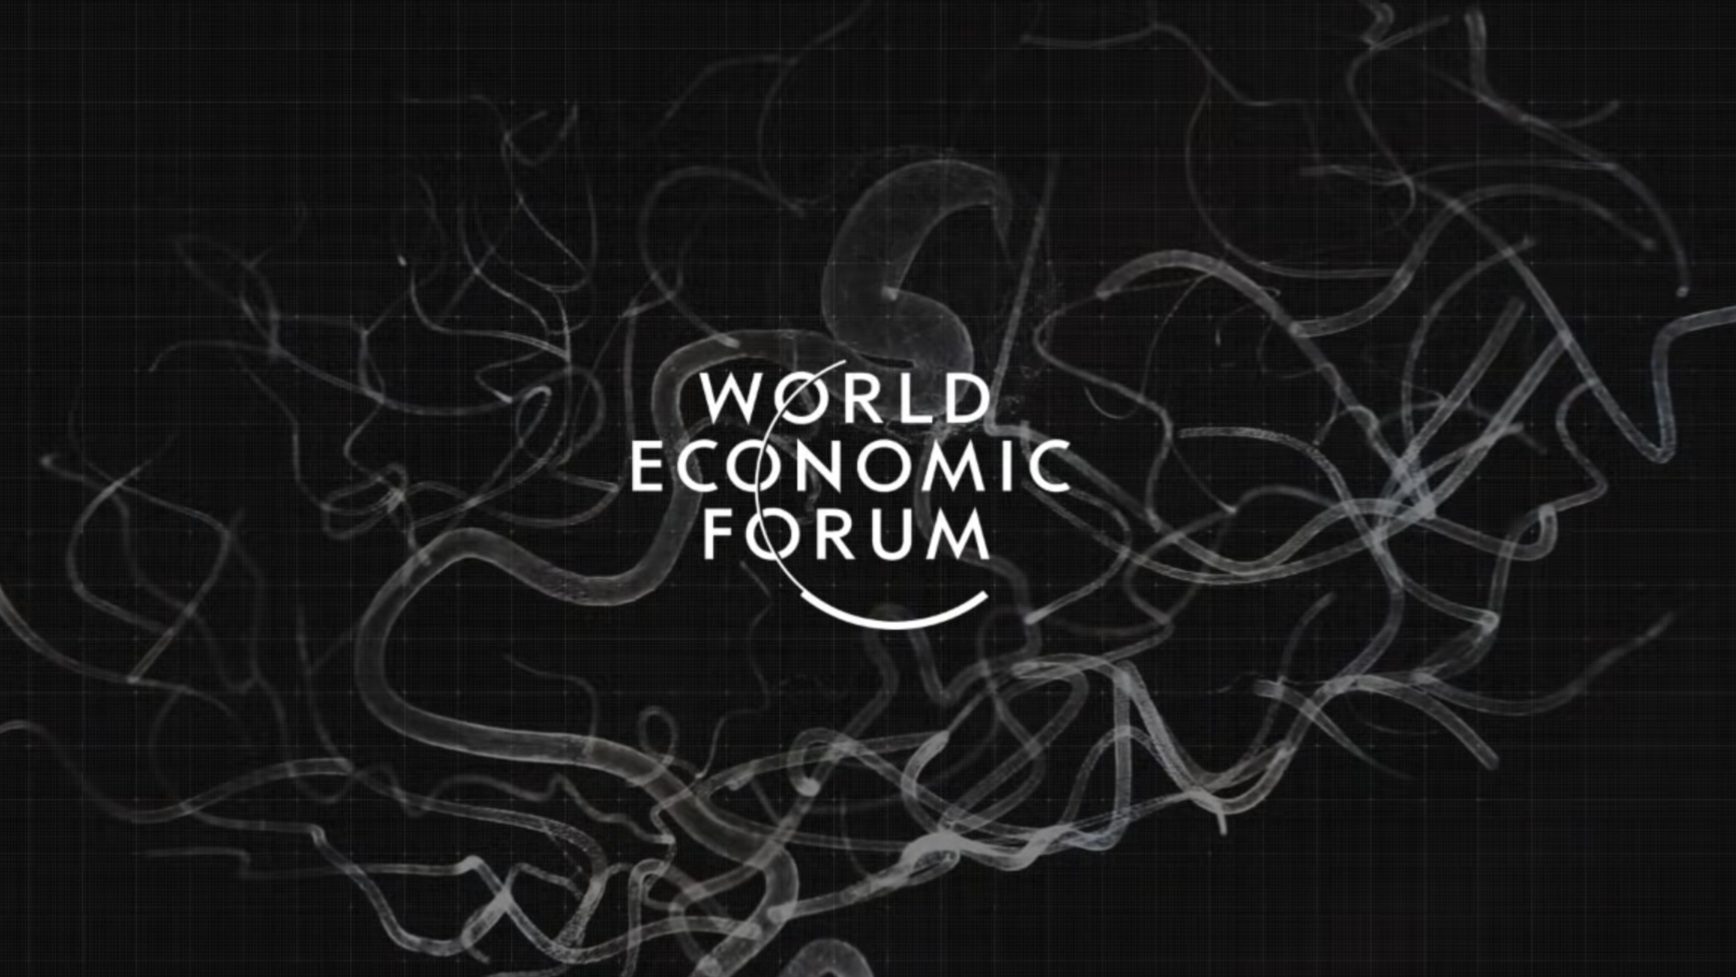 Here is the Full List of US Attendees to the World Economic Forum in Davos, Switzerland